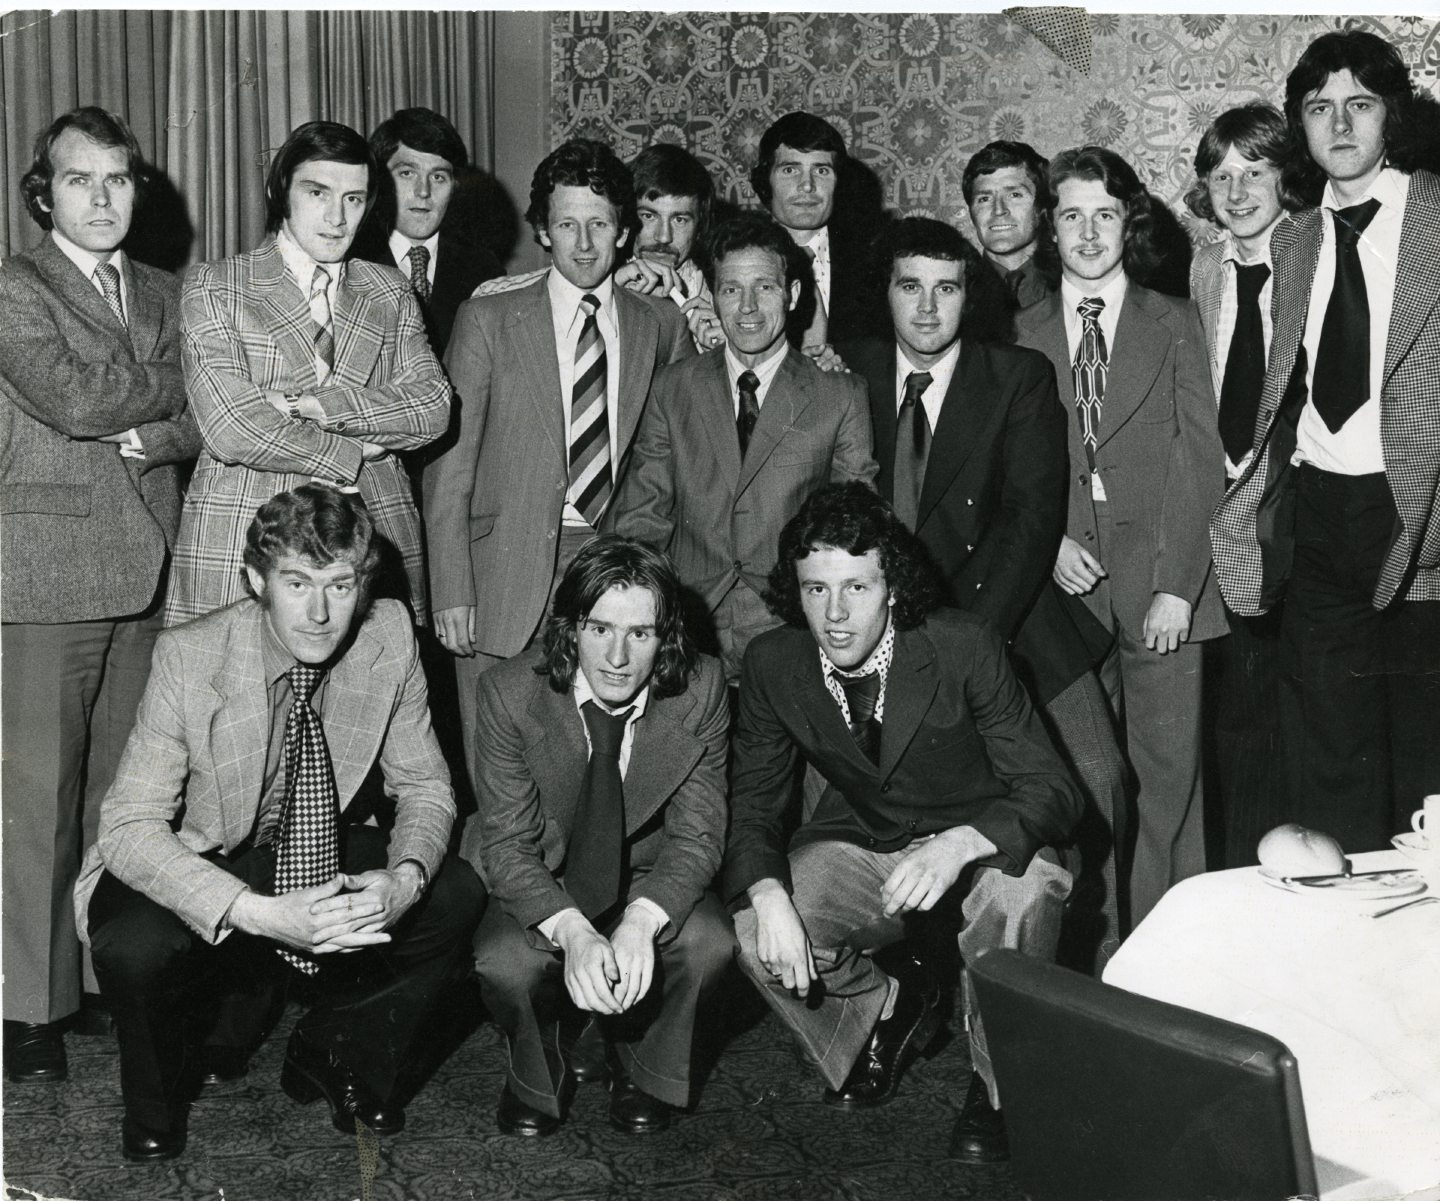 A despondent United squad line-up in the Angus Hotel following the Scottish Cup Final defeat to Celtic in 1974.